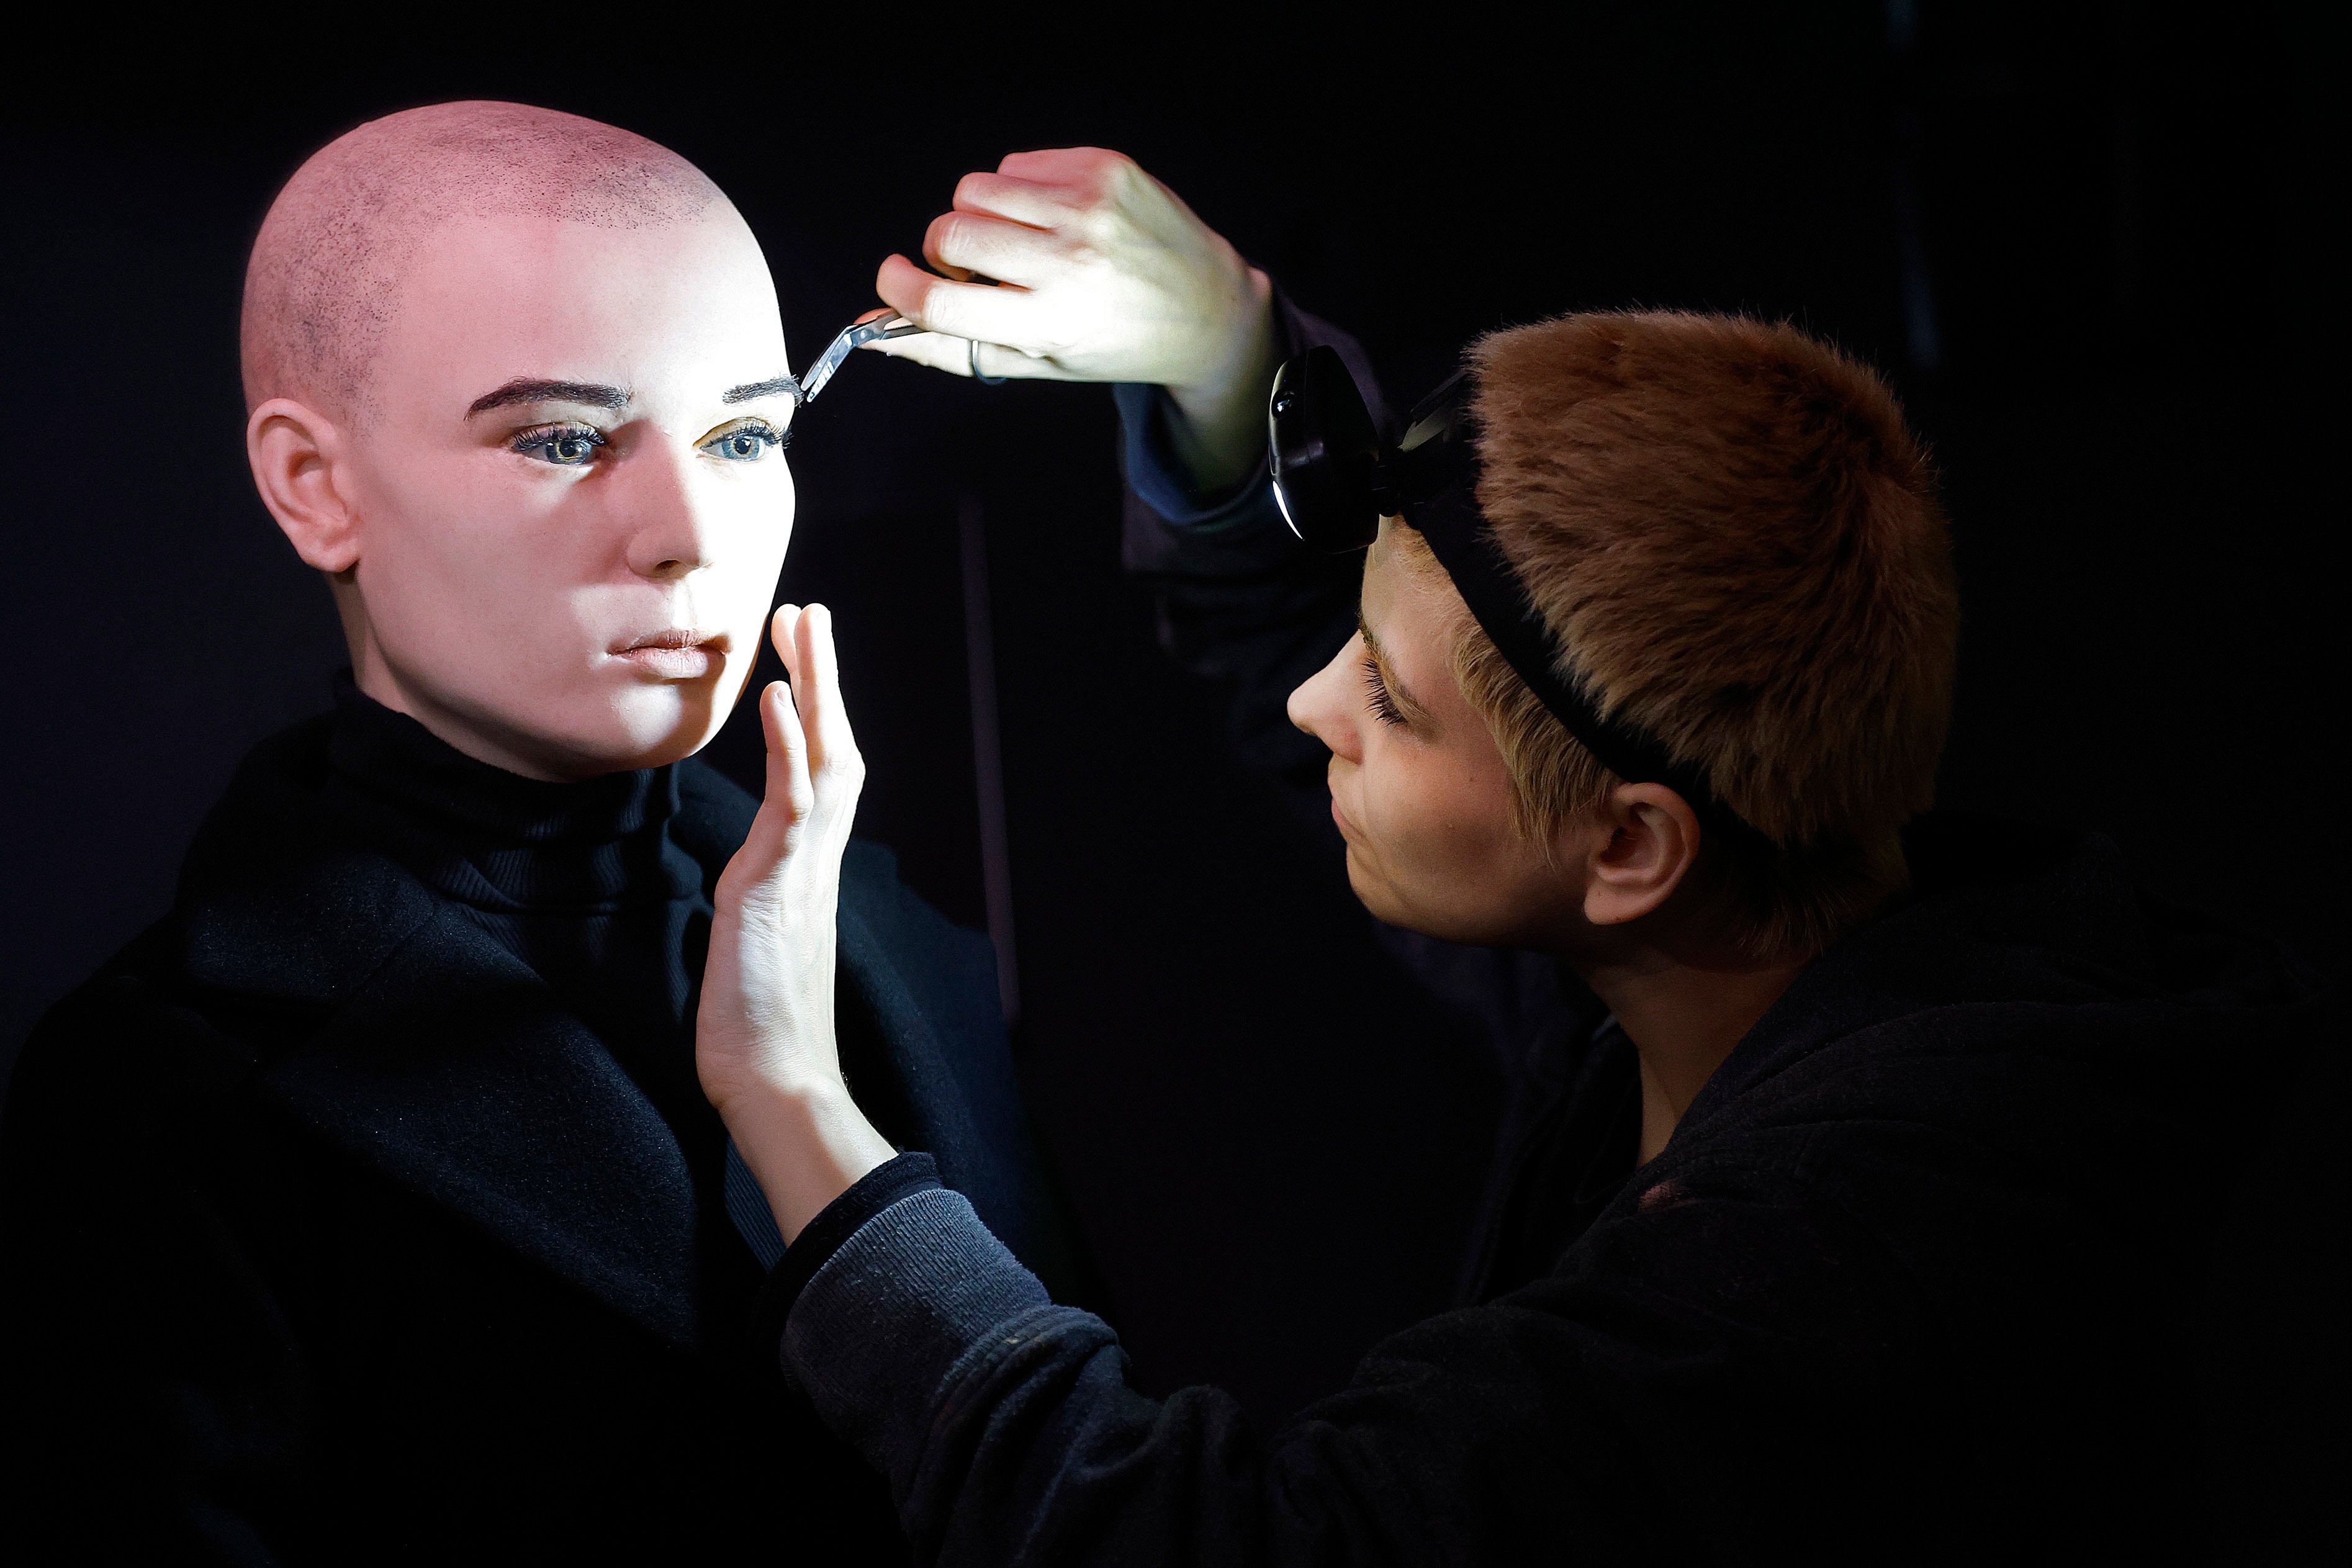 Artistic coordinator Mel Creek applies the finishing touches to a wax figure of the late singer Sinead O’Connor at the National Wax Museum Plus in Dublin’. The waxwork was criticised for looking nothing like the singer, and swiftly withdrawn from display. Photo: Julien Behal via AP